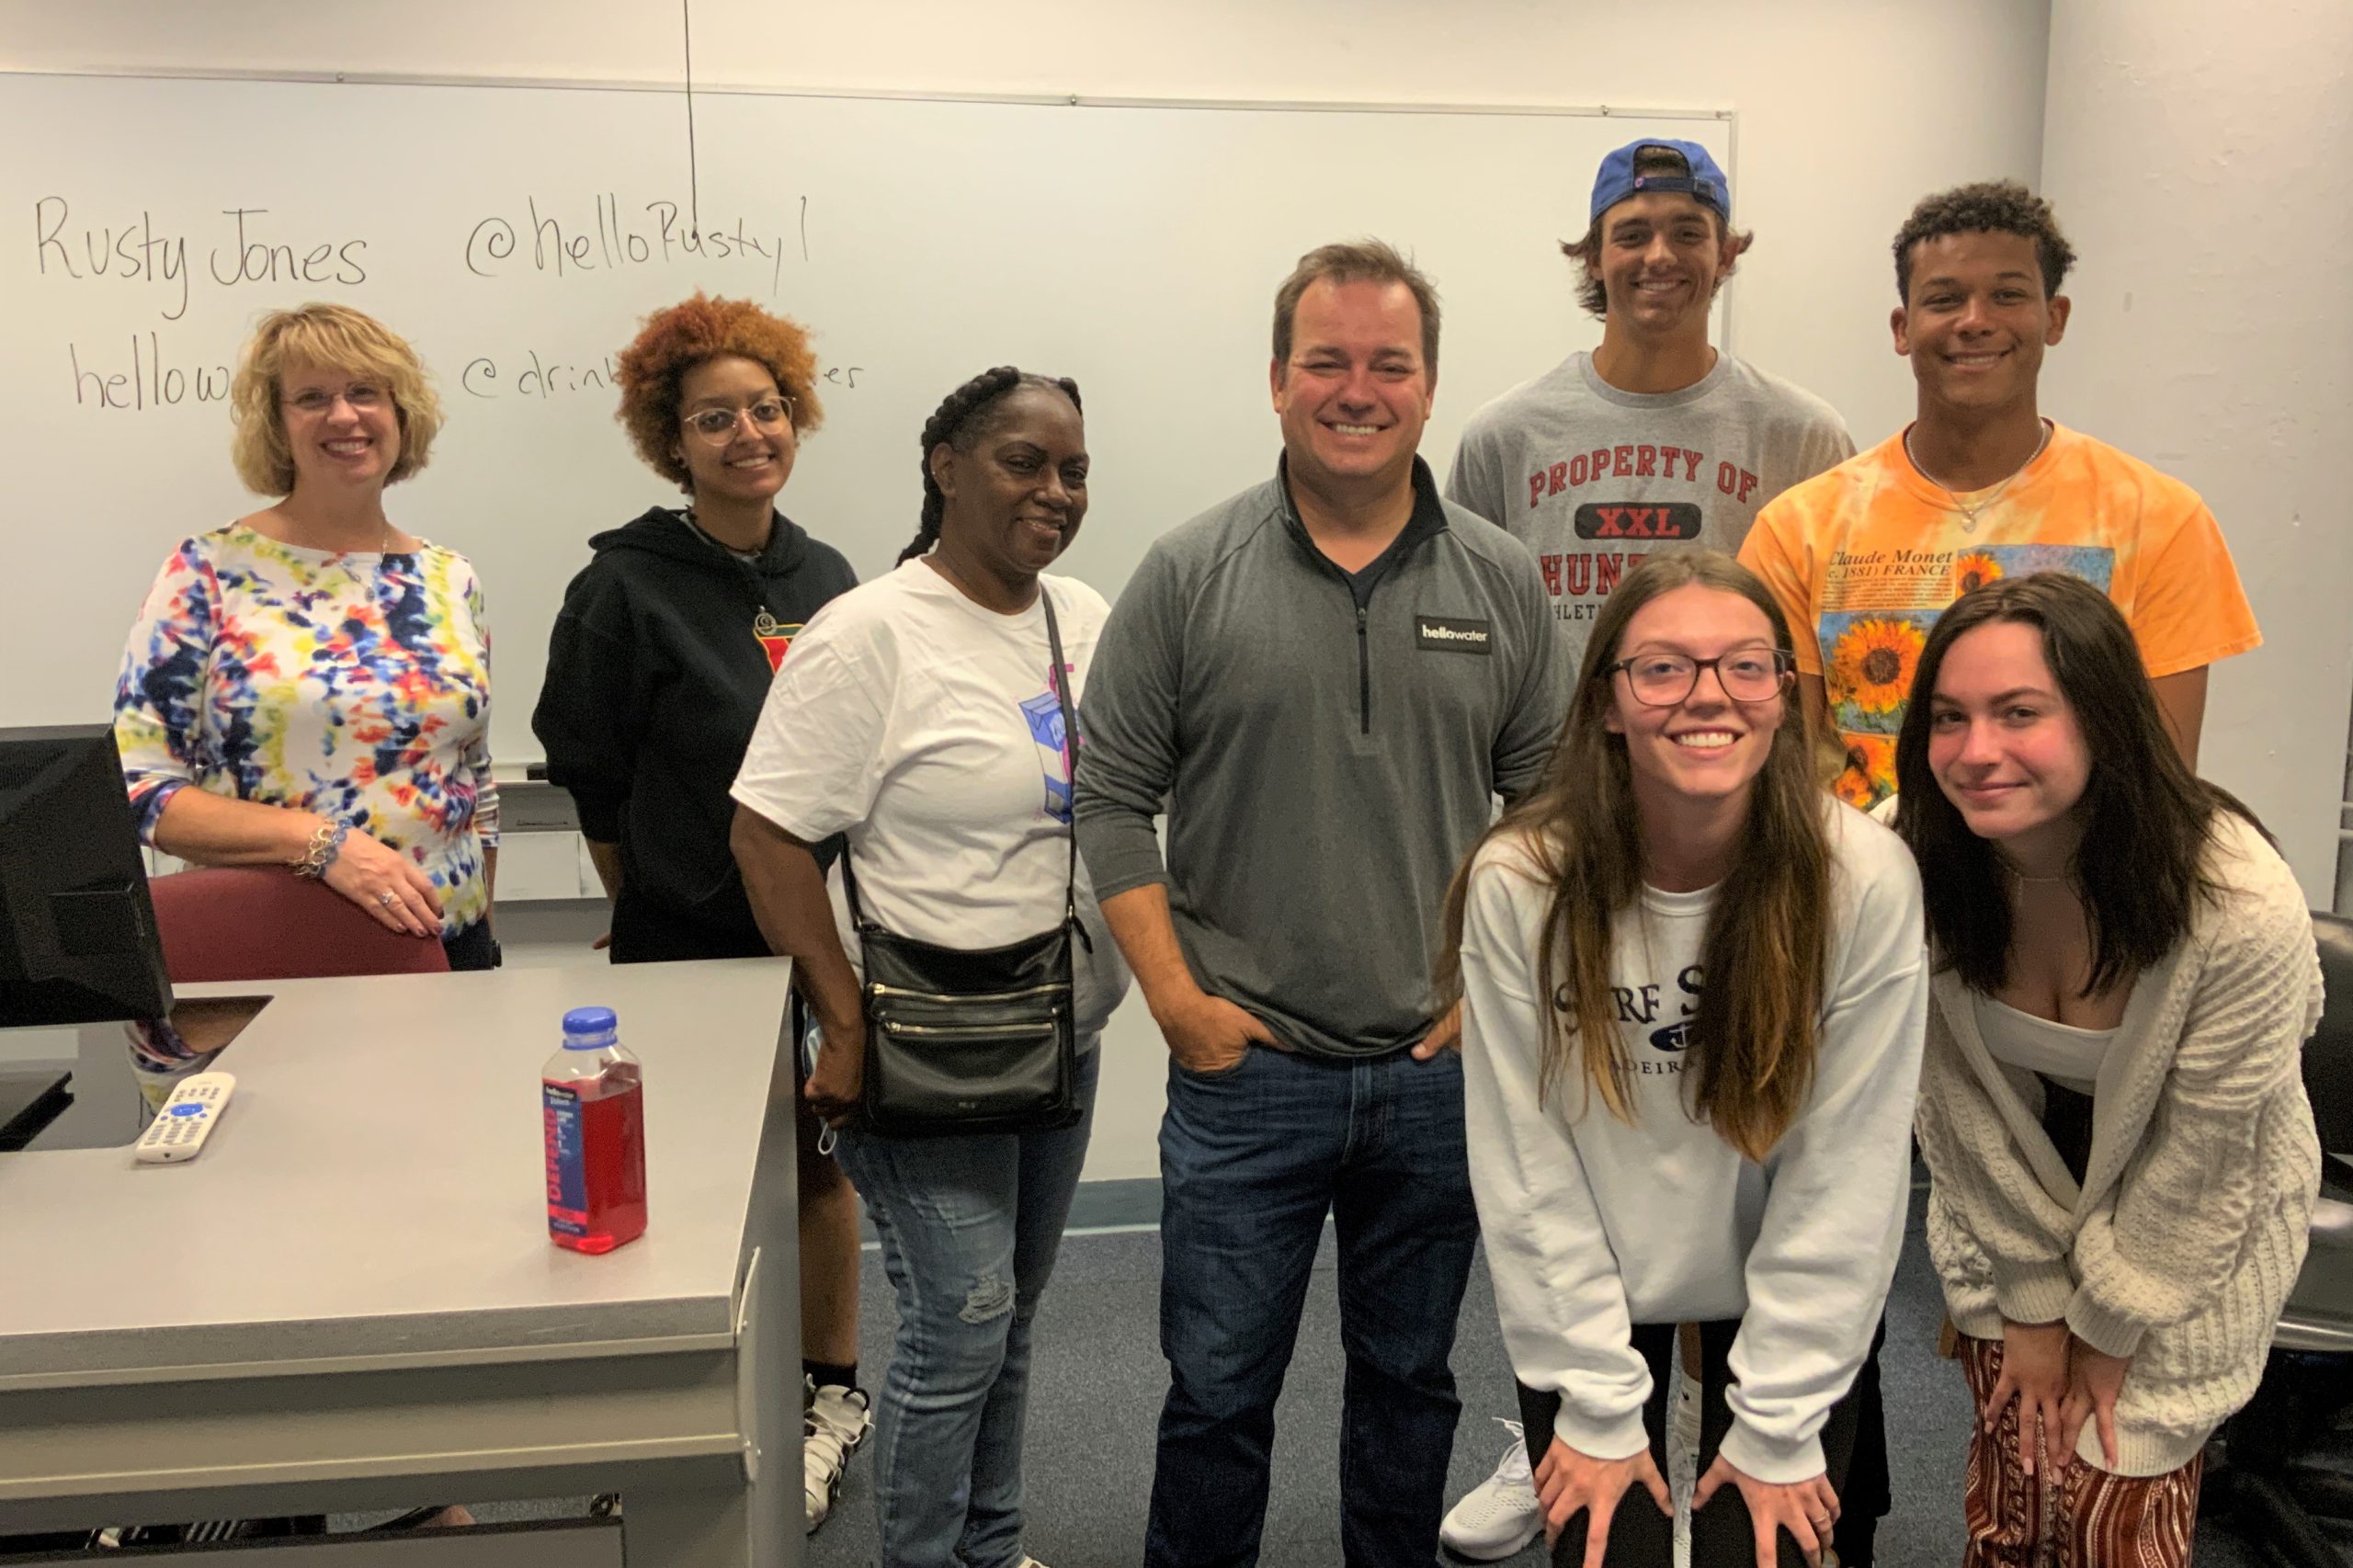 Christie Hovey and students in her business class pose for a photo with Rusty Jones at the front of a classroom.